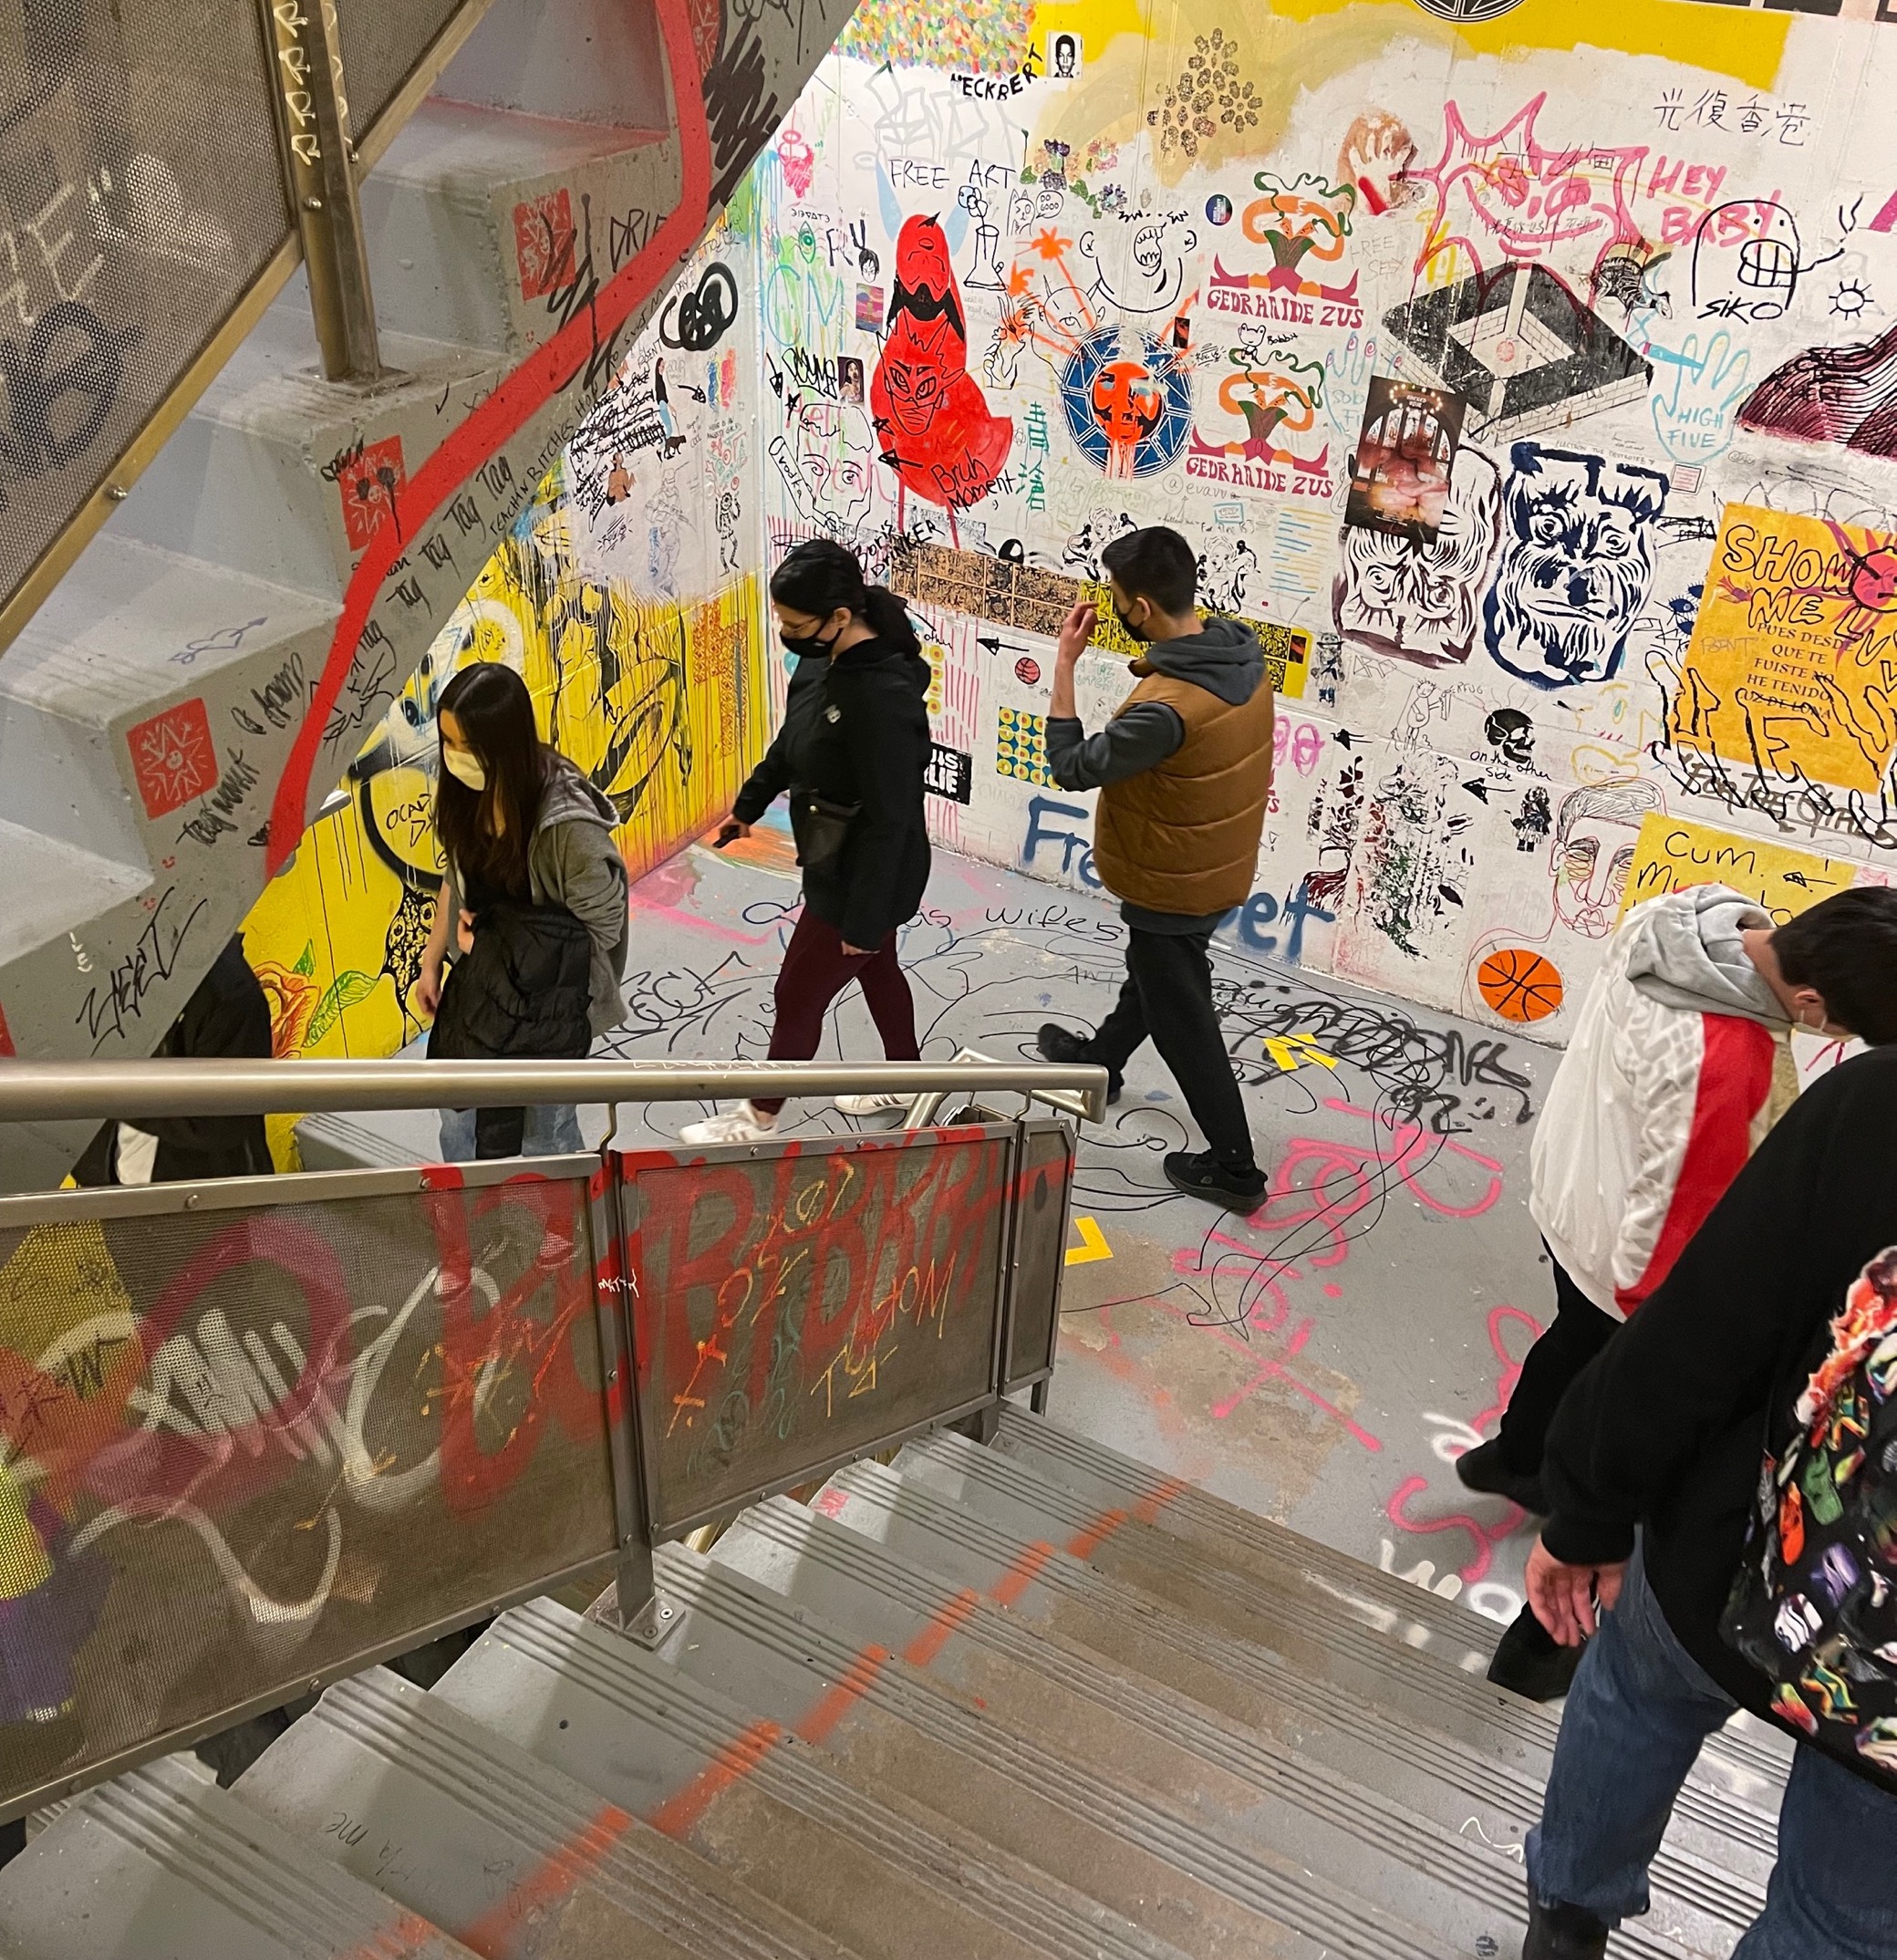 Masked tour group walking through a colourful, graffiti-covered staircase.